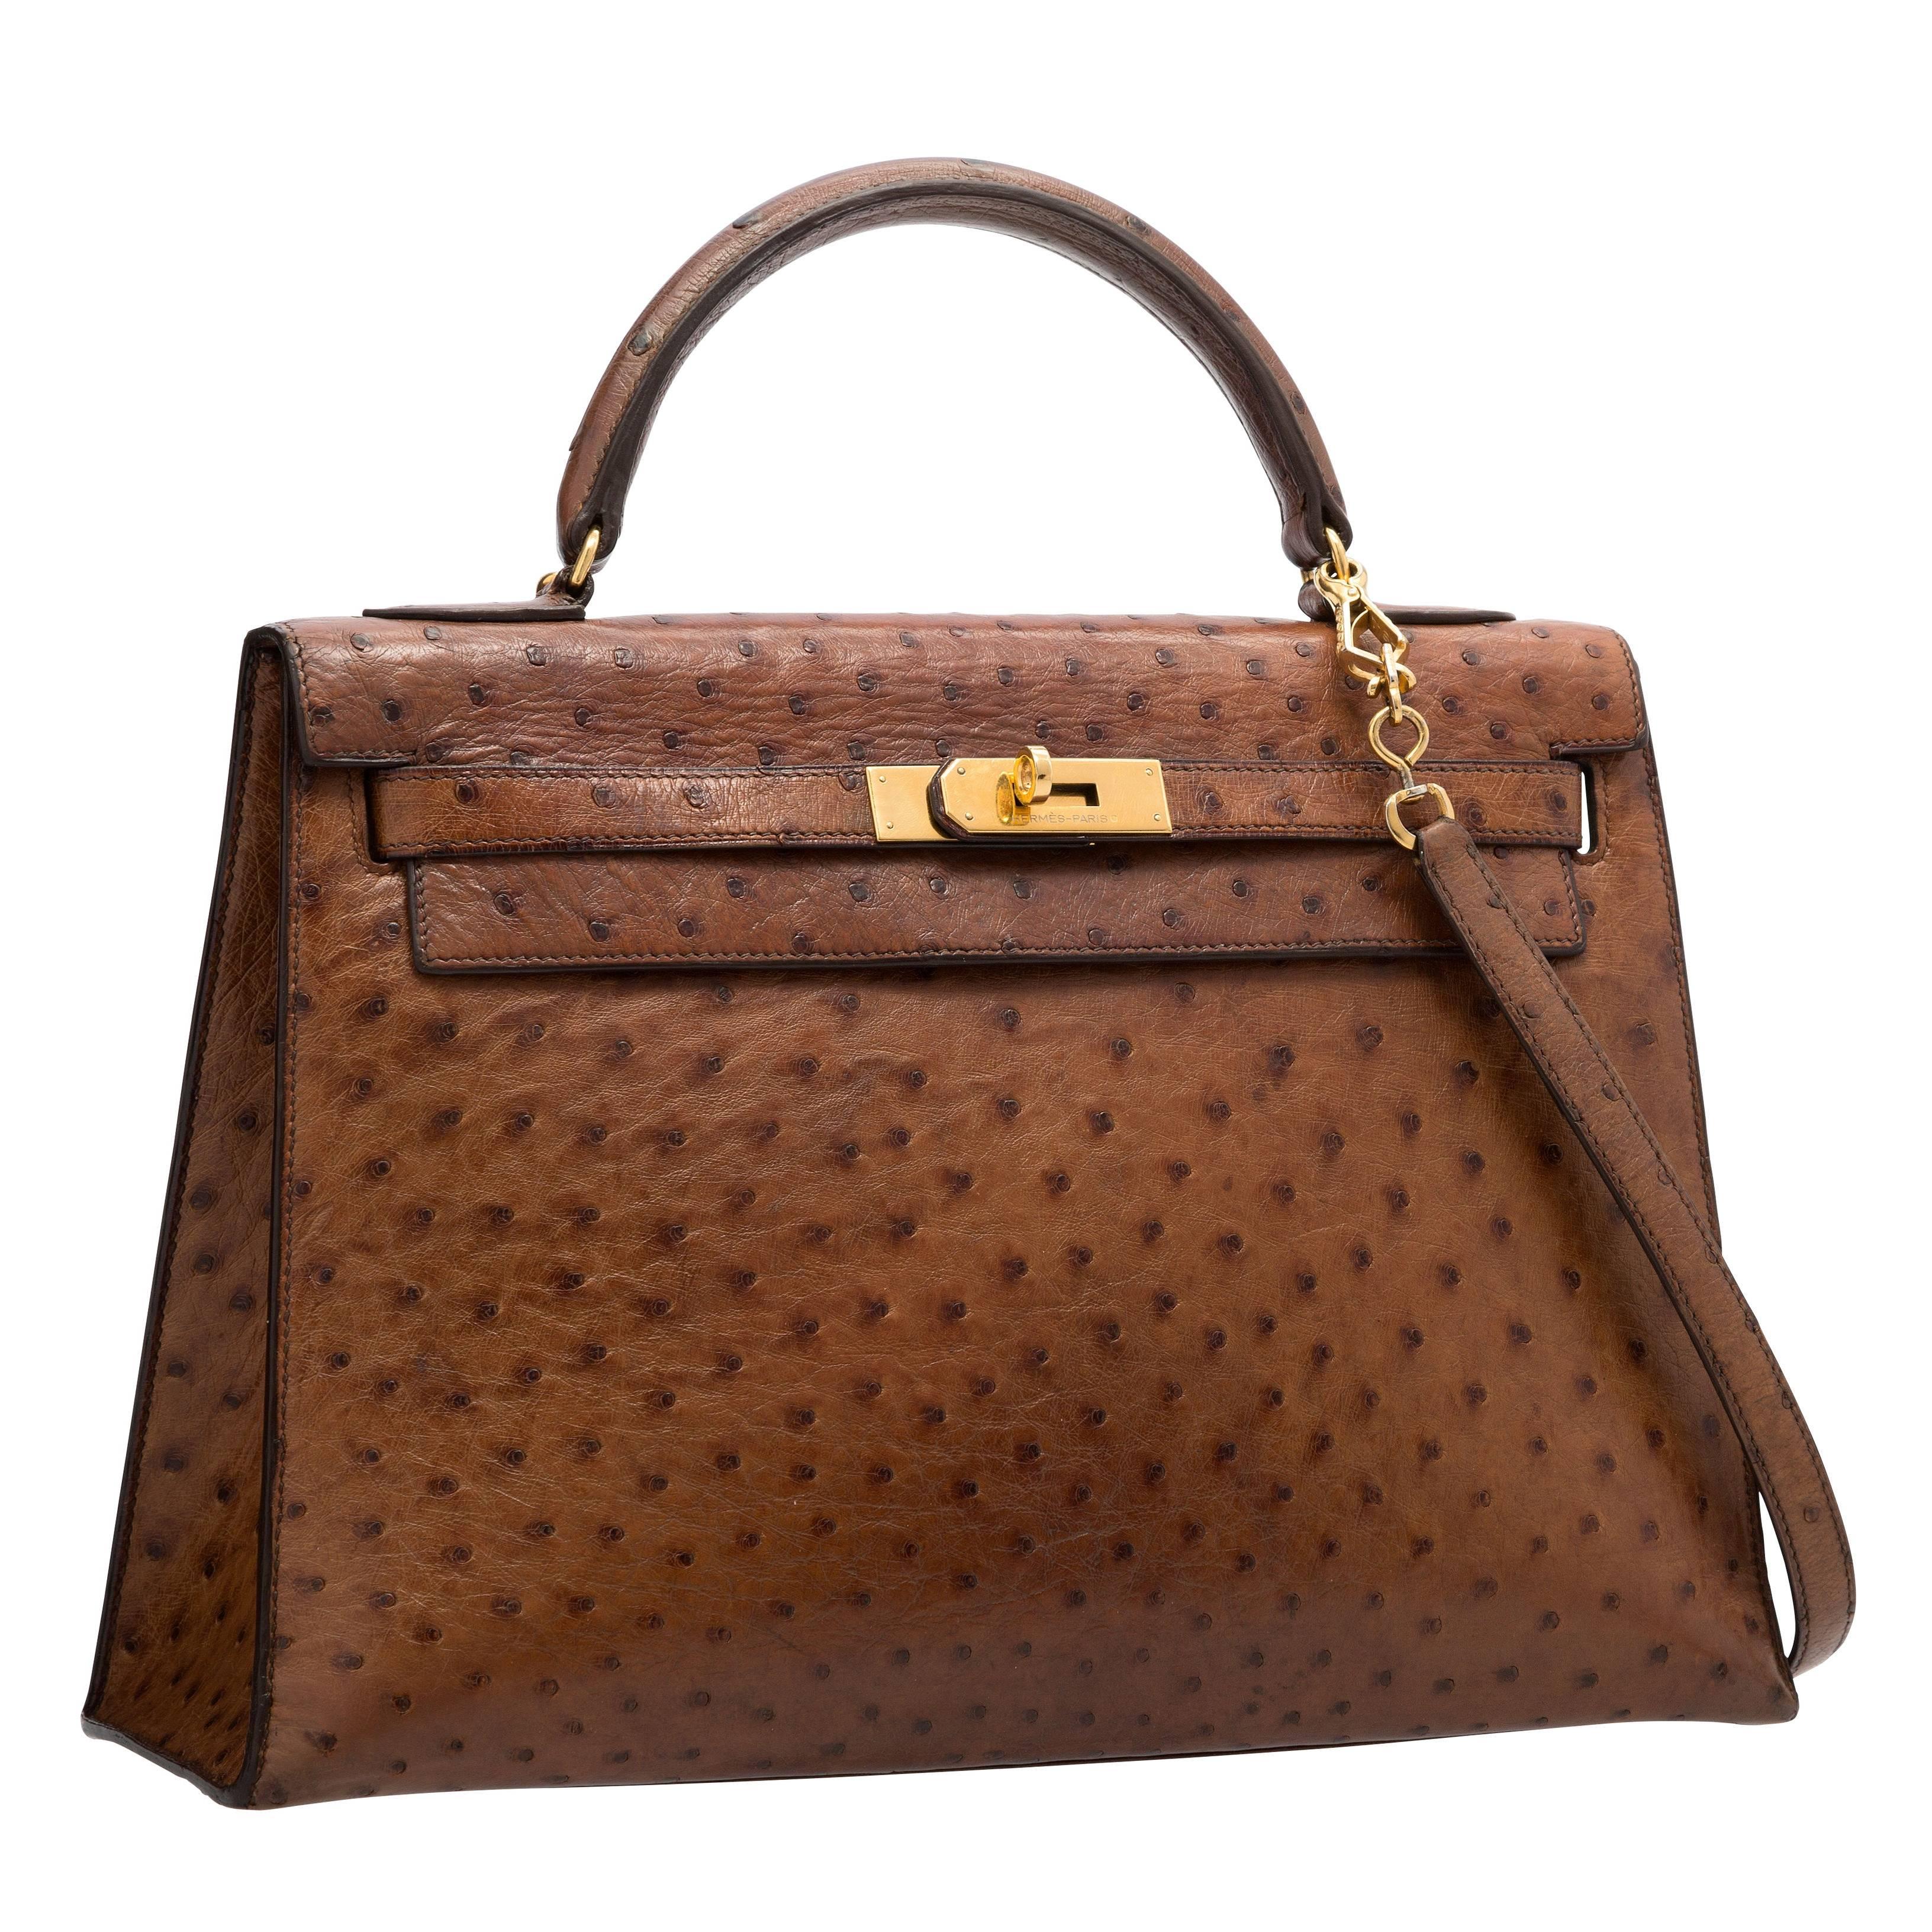 Hermes 32cm Noisette Ostrich Sellier Kelly Bag with Gold Hardware For Sale